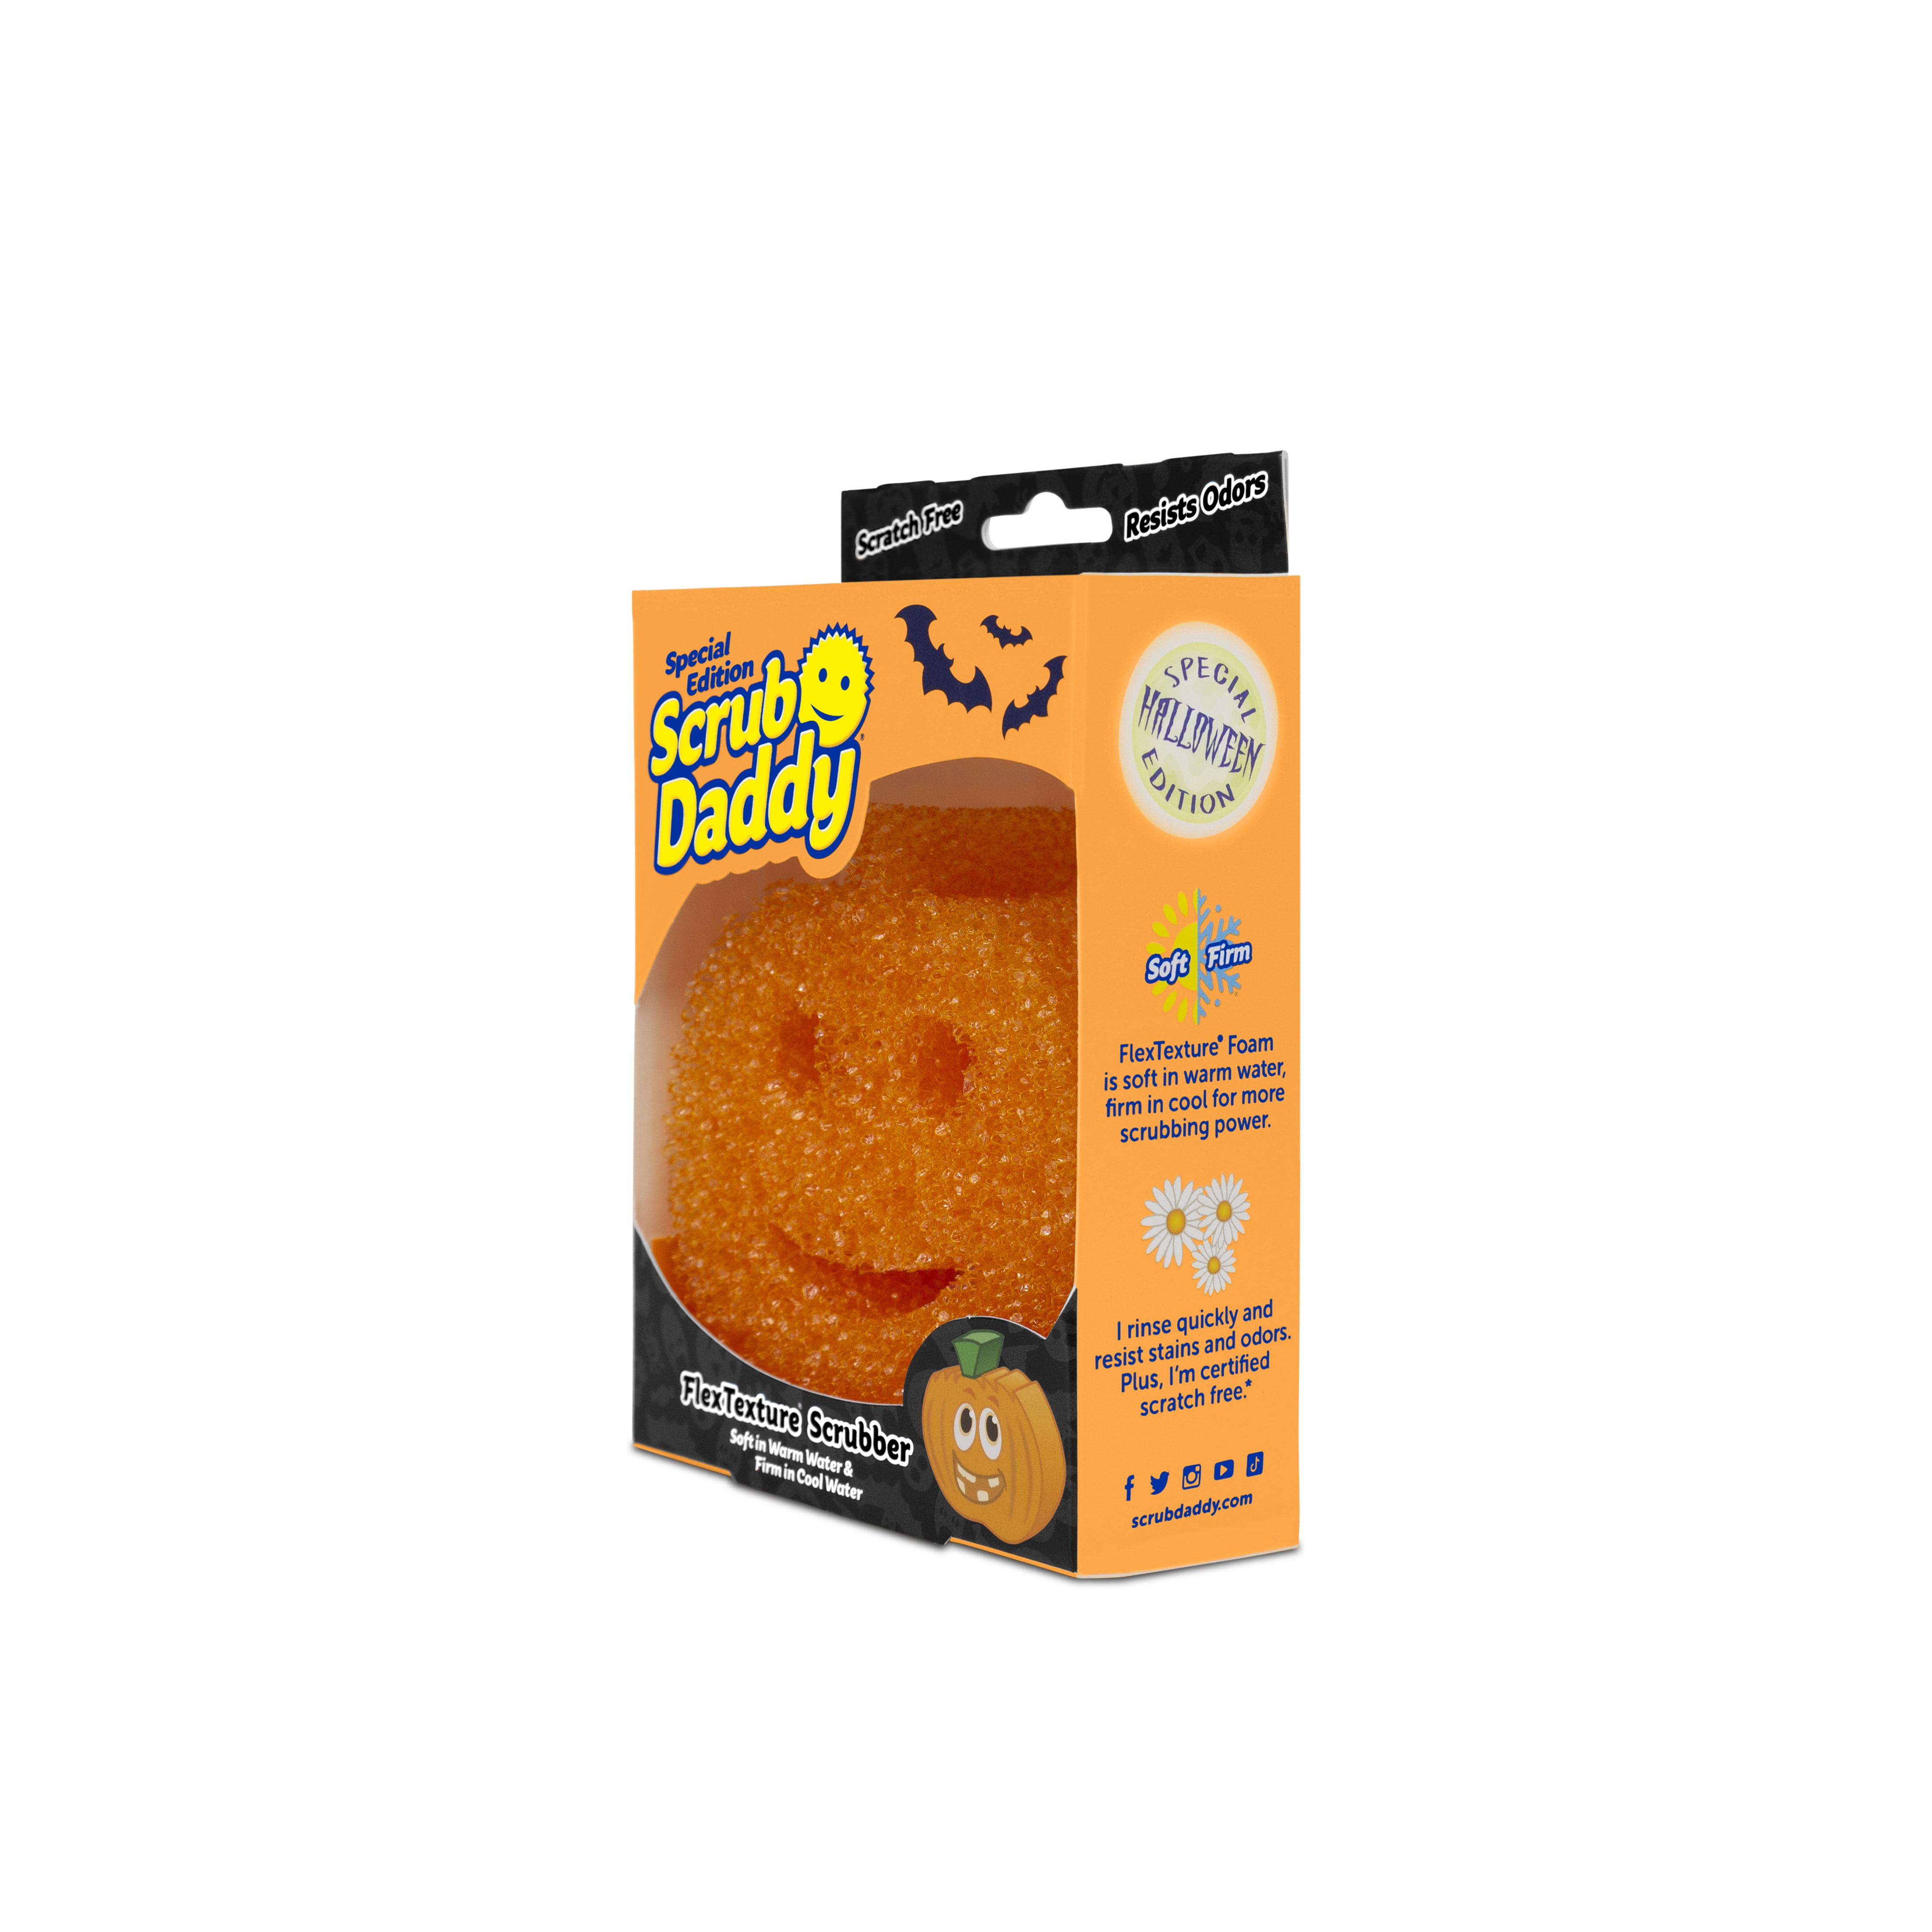 👻 Halloween Scrub Daddy sponge 3-packs are at Walmart for $14.98